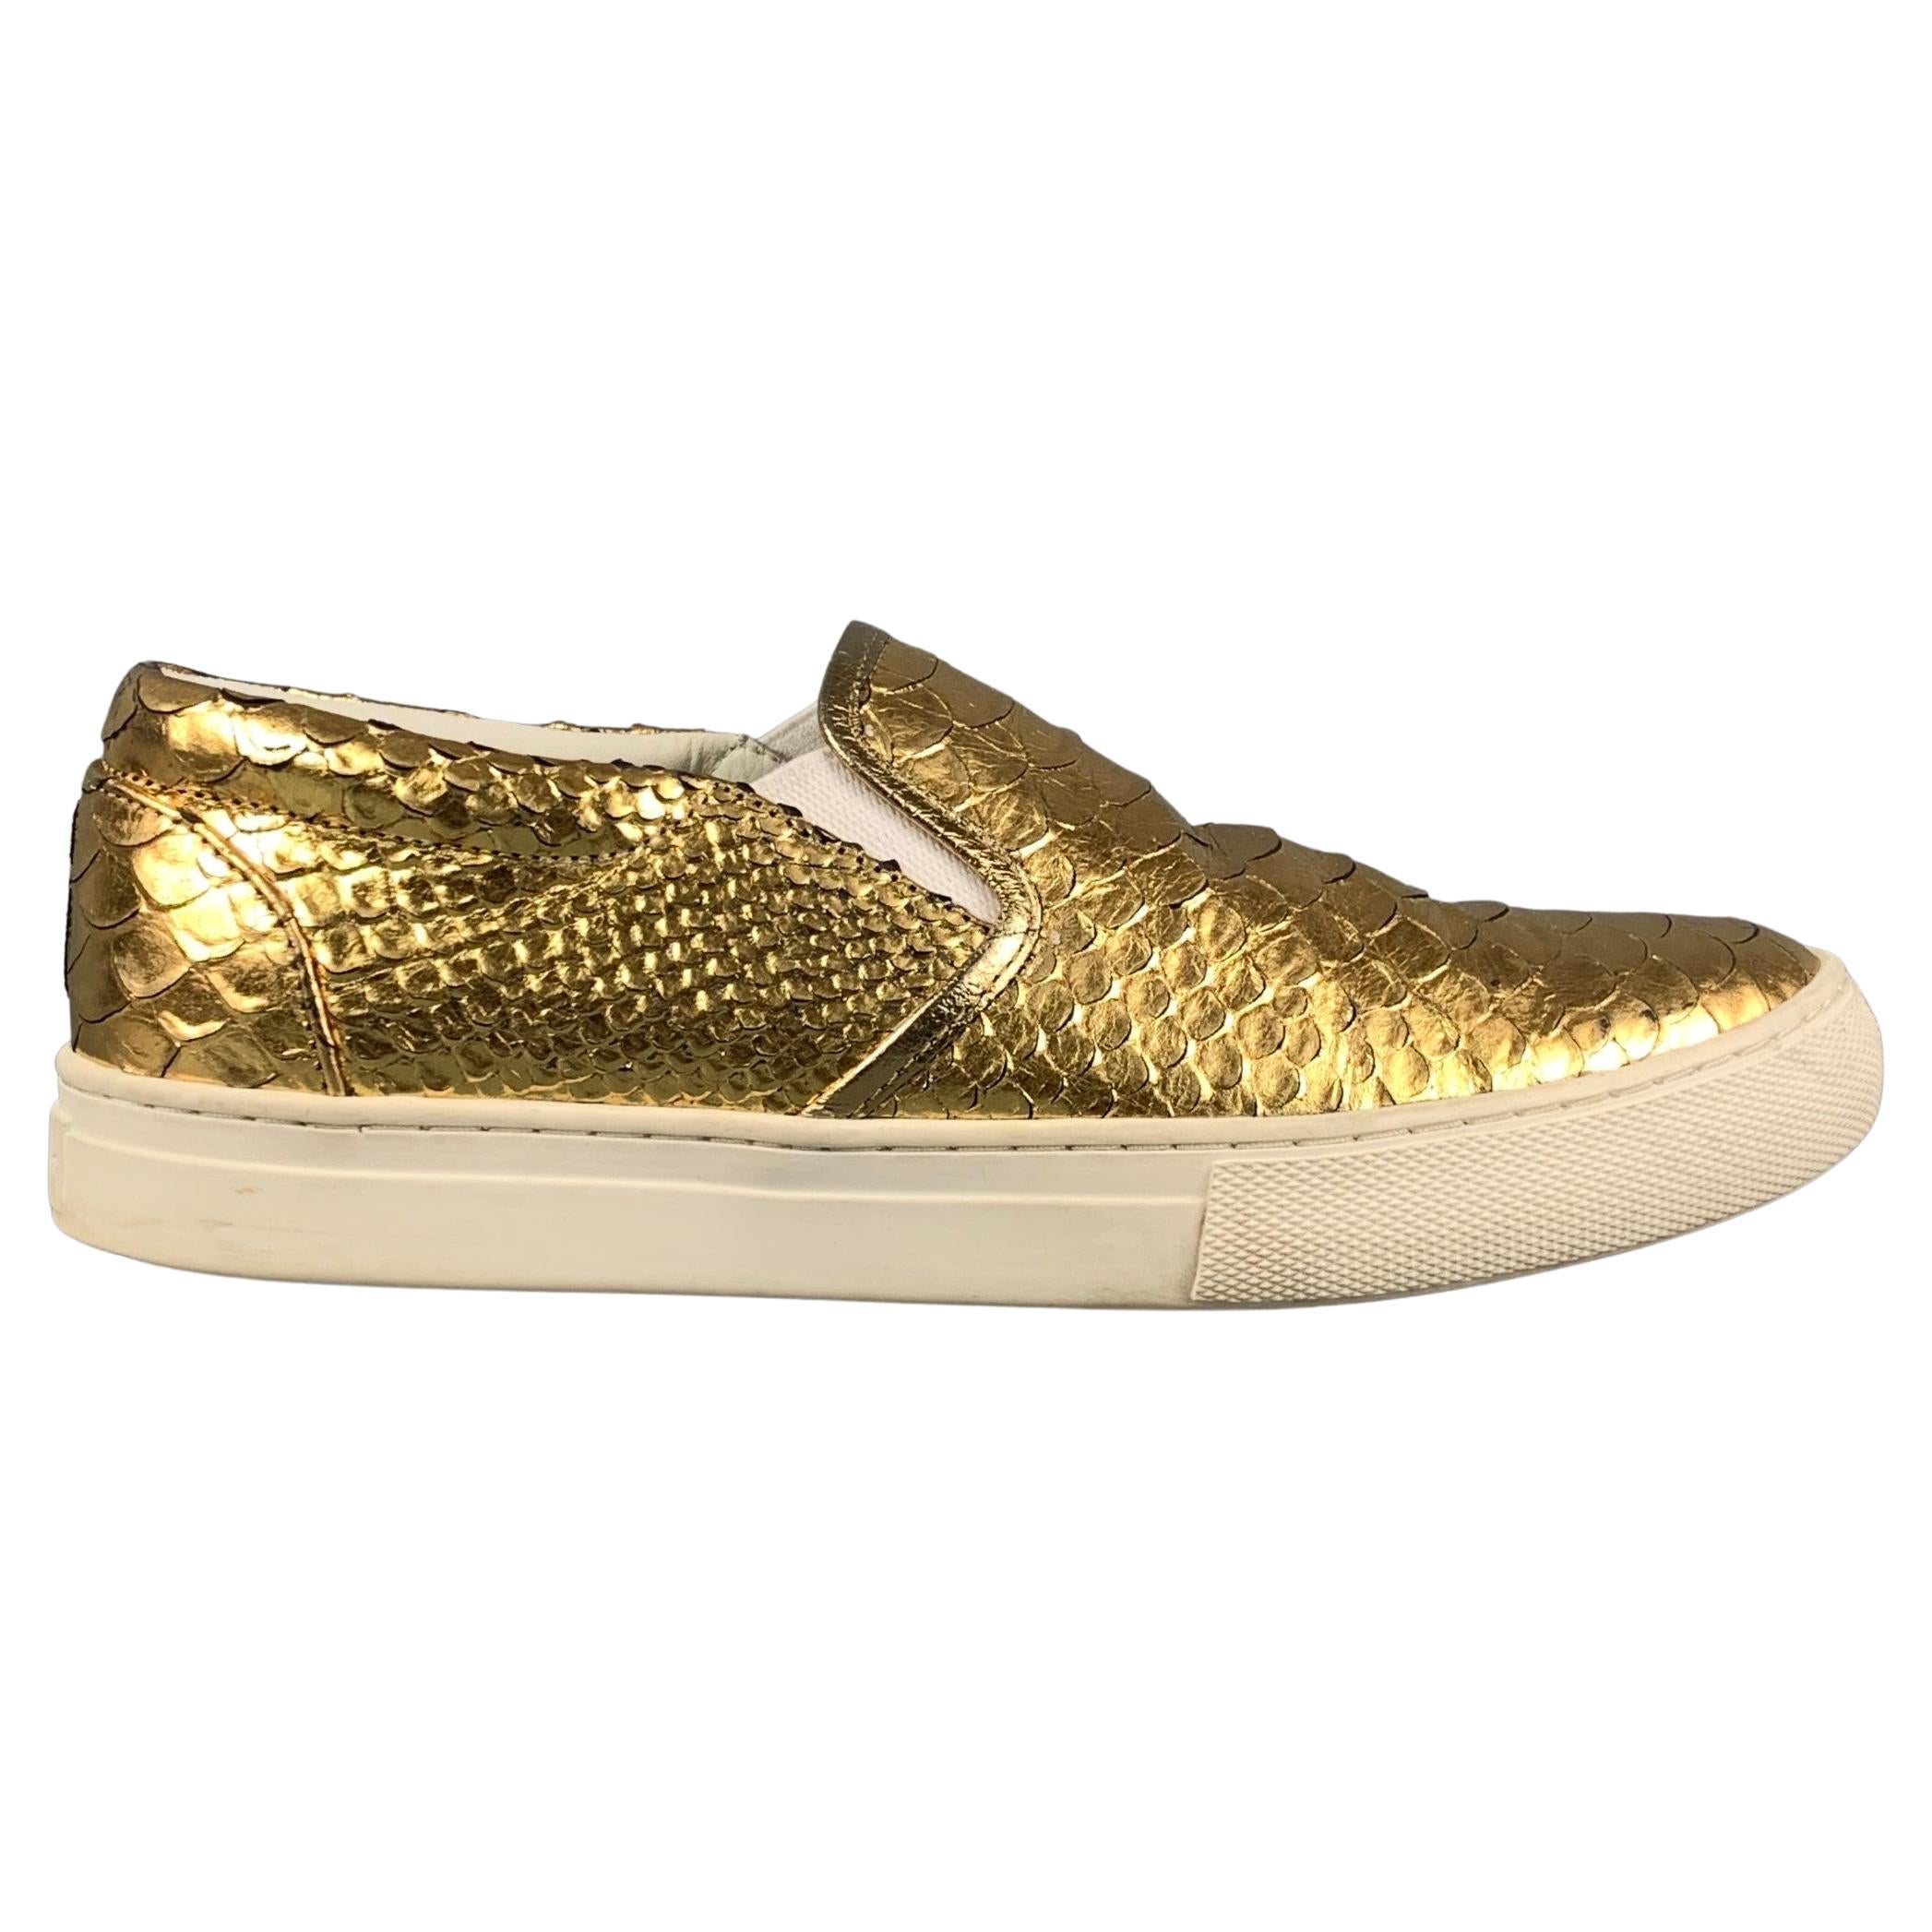 MARC JACOBS Size 7.5 Gold Textured Leather Slip On Sneakers For Sale at | marc jacobs sneakers, marc jacobs shoes, marc jacobs slippers